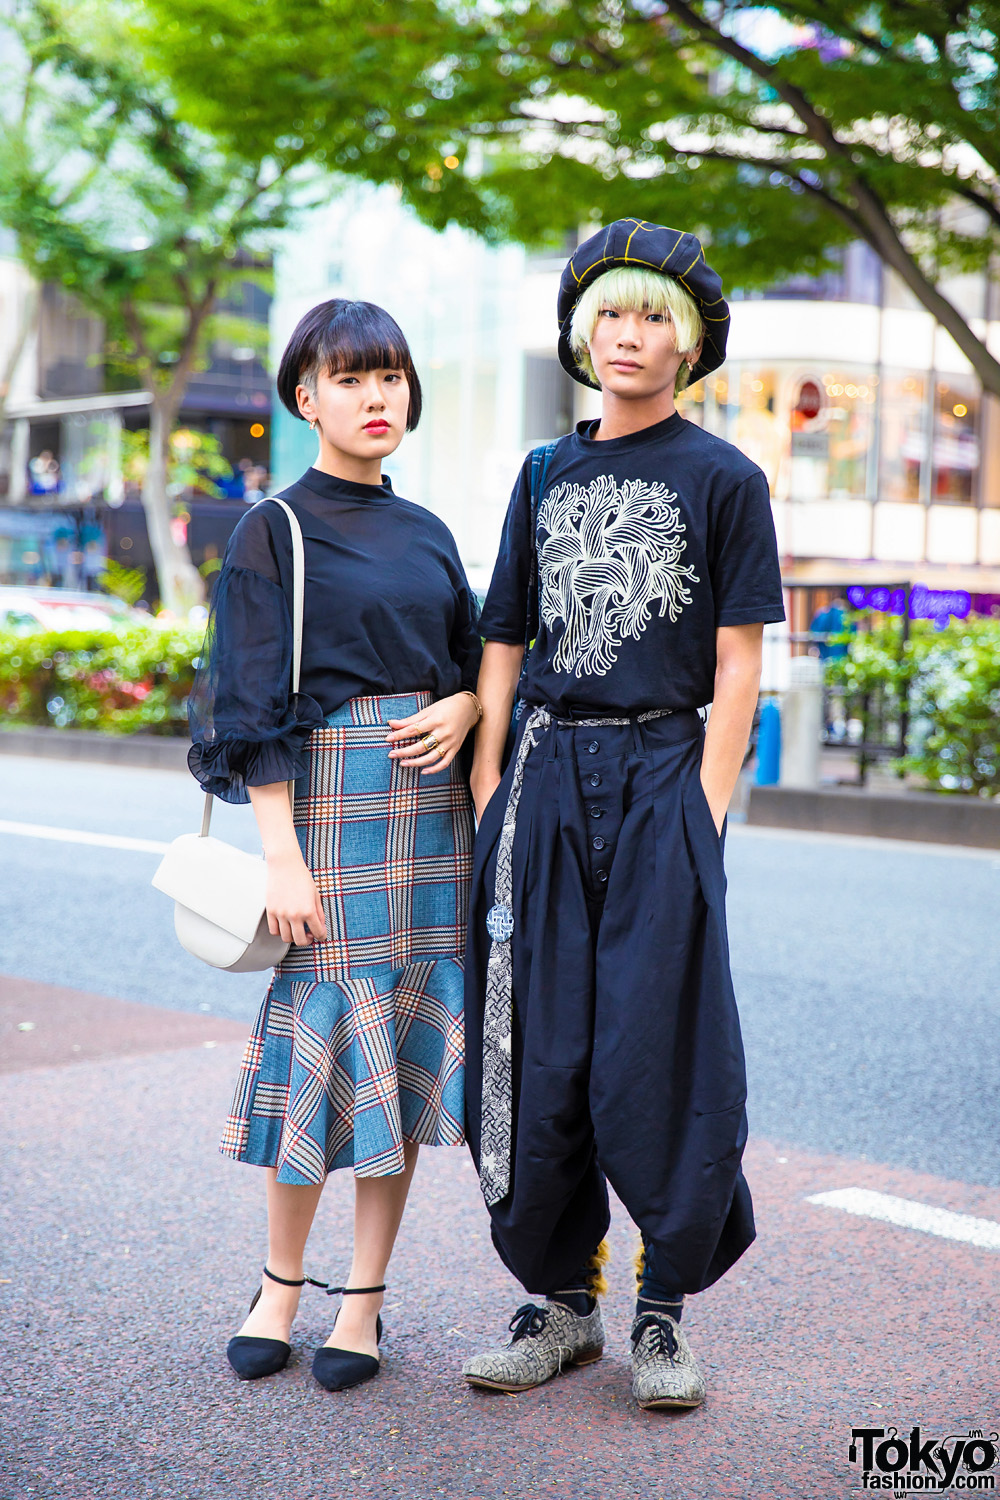 Japanese Duo's Chic Streetwear w/ Azul By Moussy Flap Bag